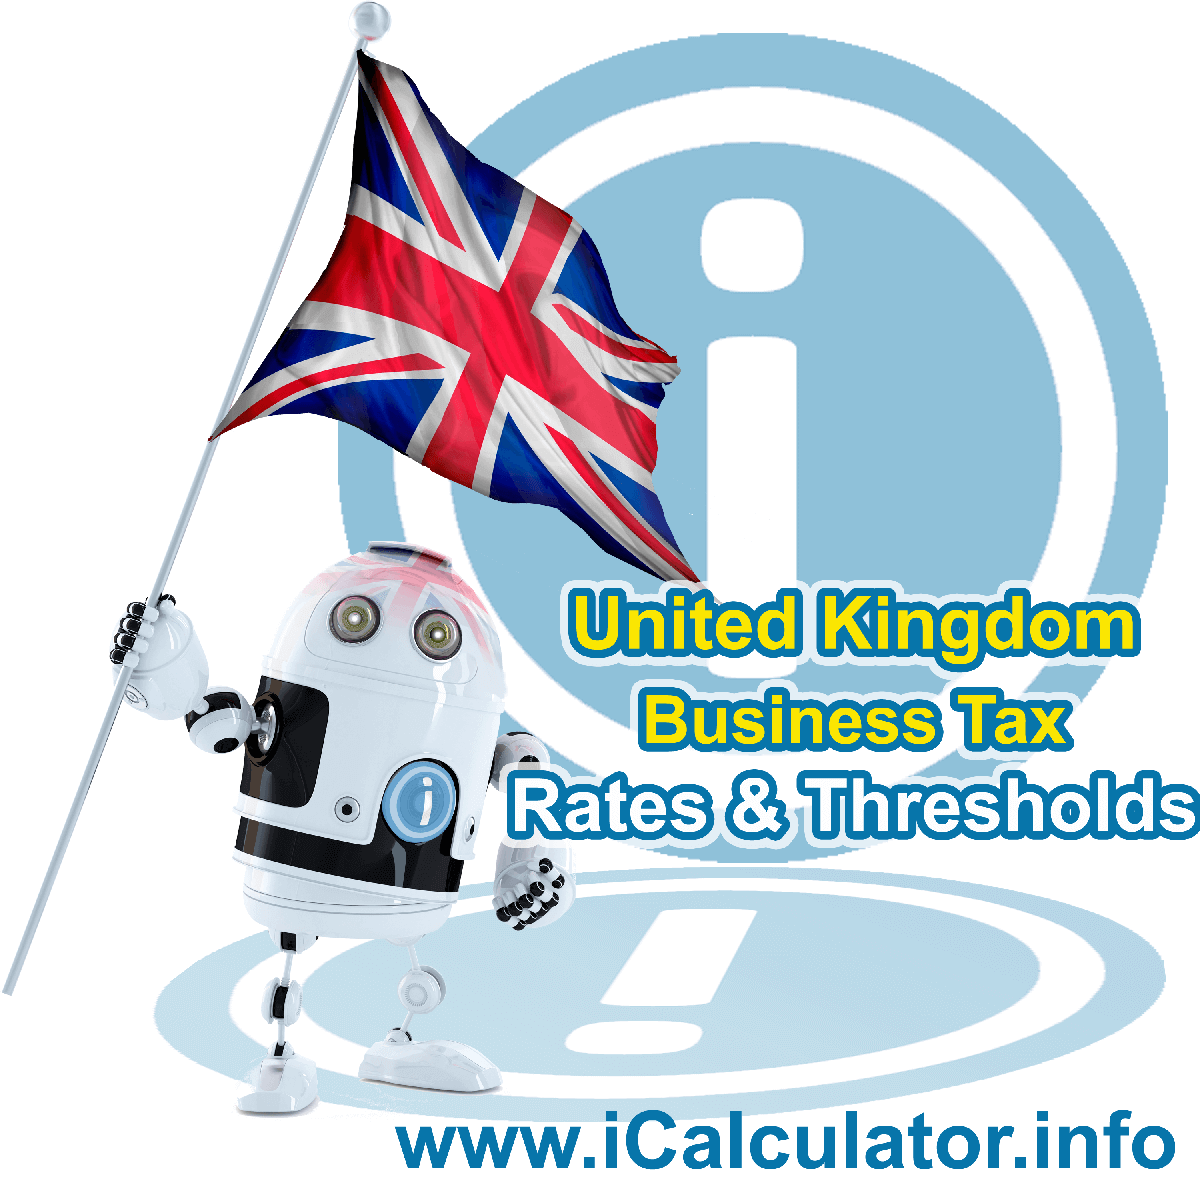 United Kingdom Corporation Tax Rates in 2016. This image shows the United Kingdom flag and information relating to the corporation tax formula for the United Kingdom Corporation Tax Calculator in 2016